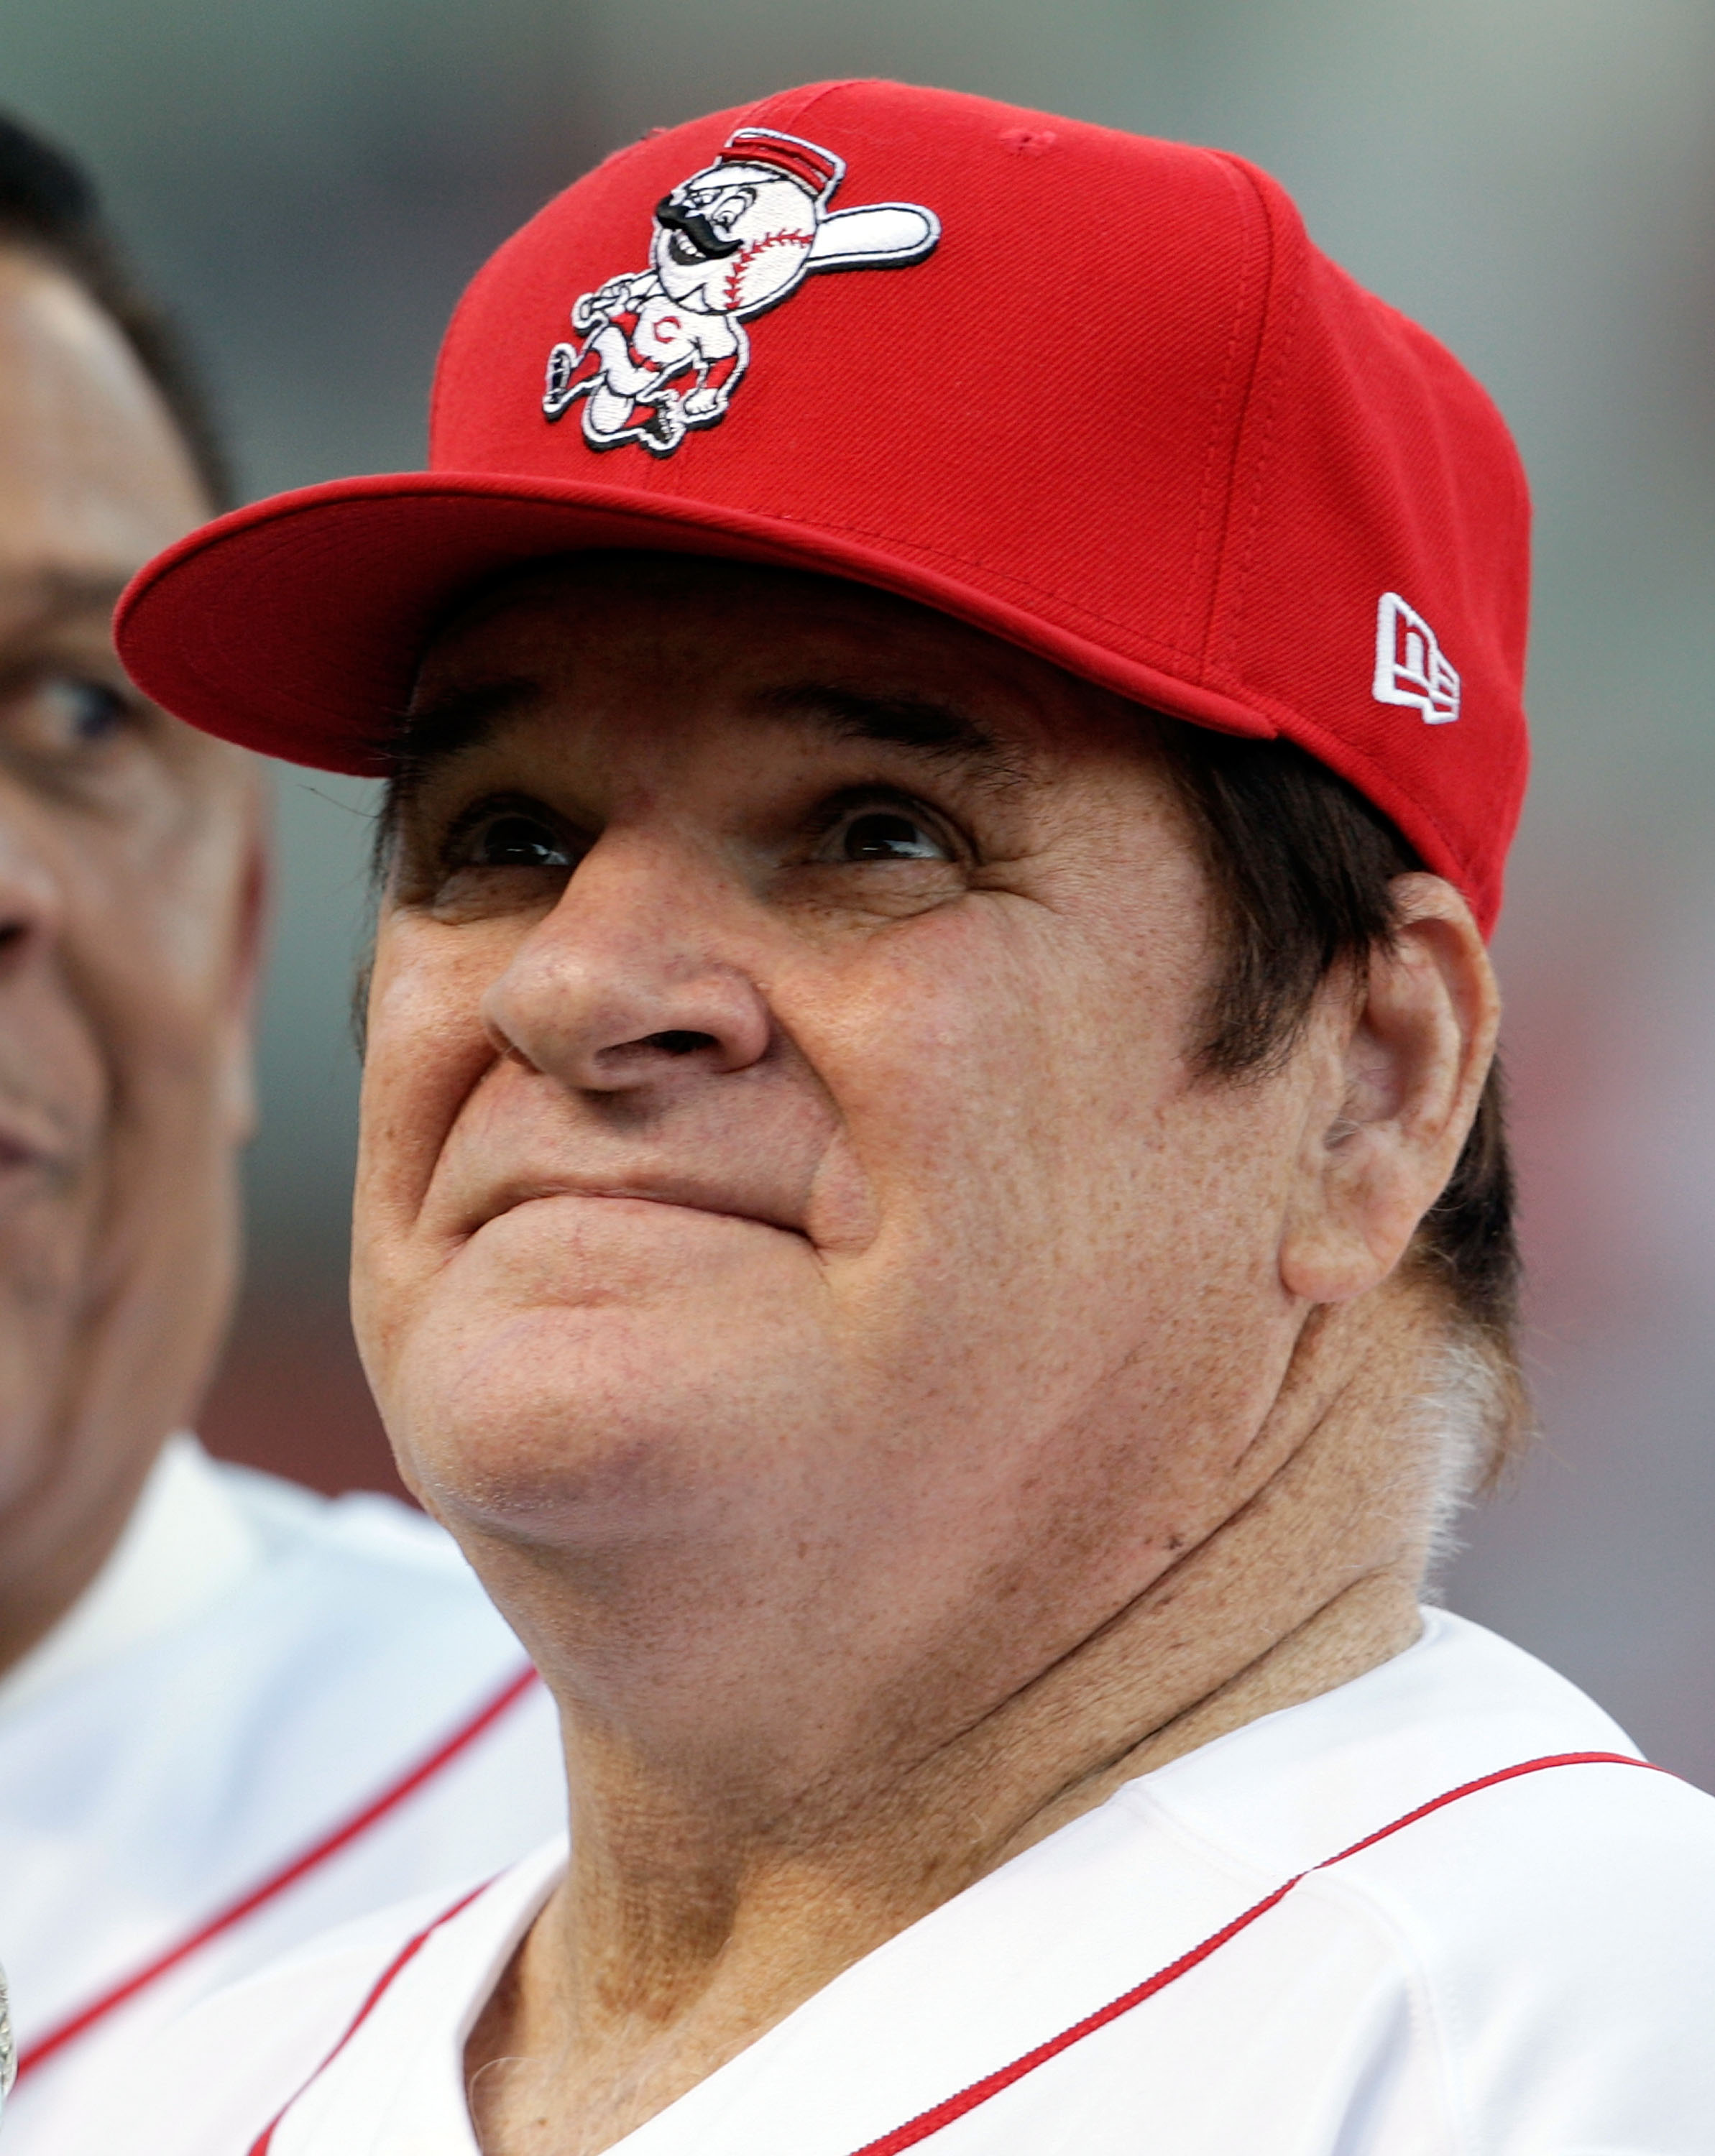 CINCINNATI - SEPTEMBER 11:  Pete Rose takes part in the ceremony celebrating the 25th anniversary of his breaking the career hit record of 4,192 on September 11, 2010 at Great American Ball Park in Cincinnati, Ohio. He was honored before the start of the